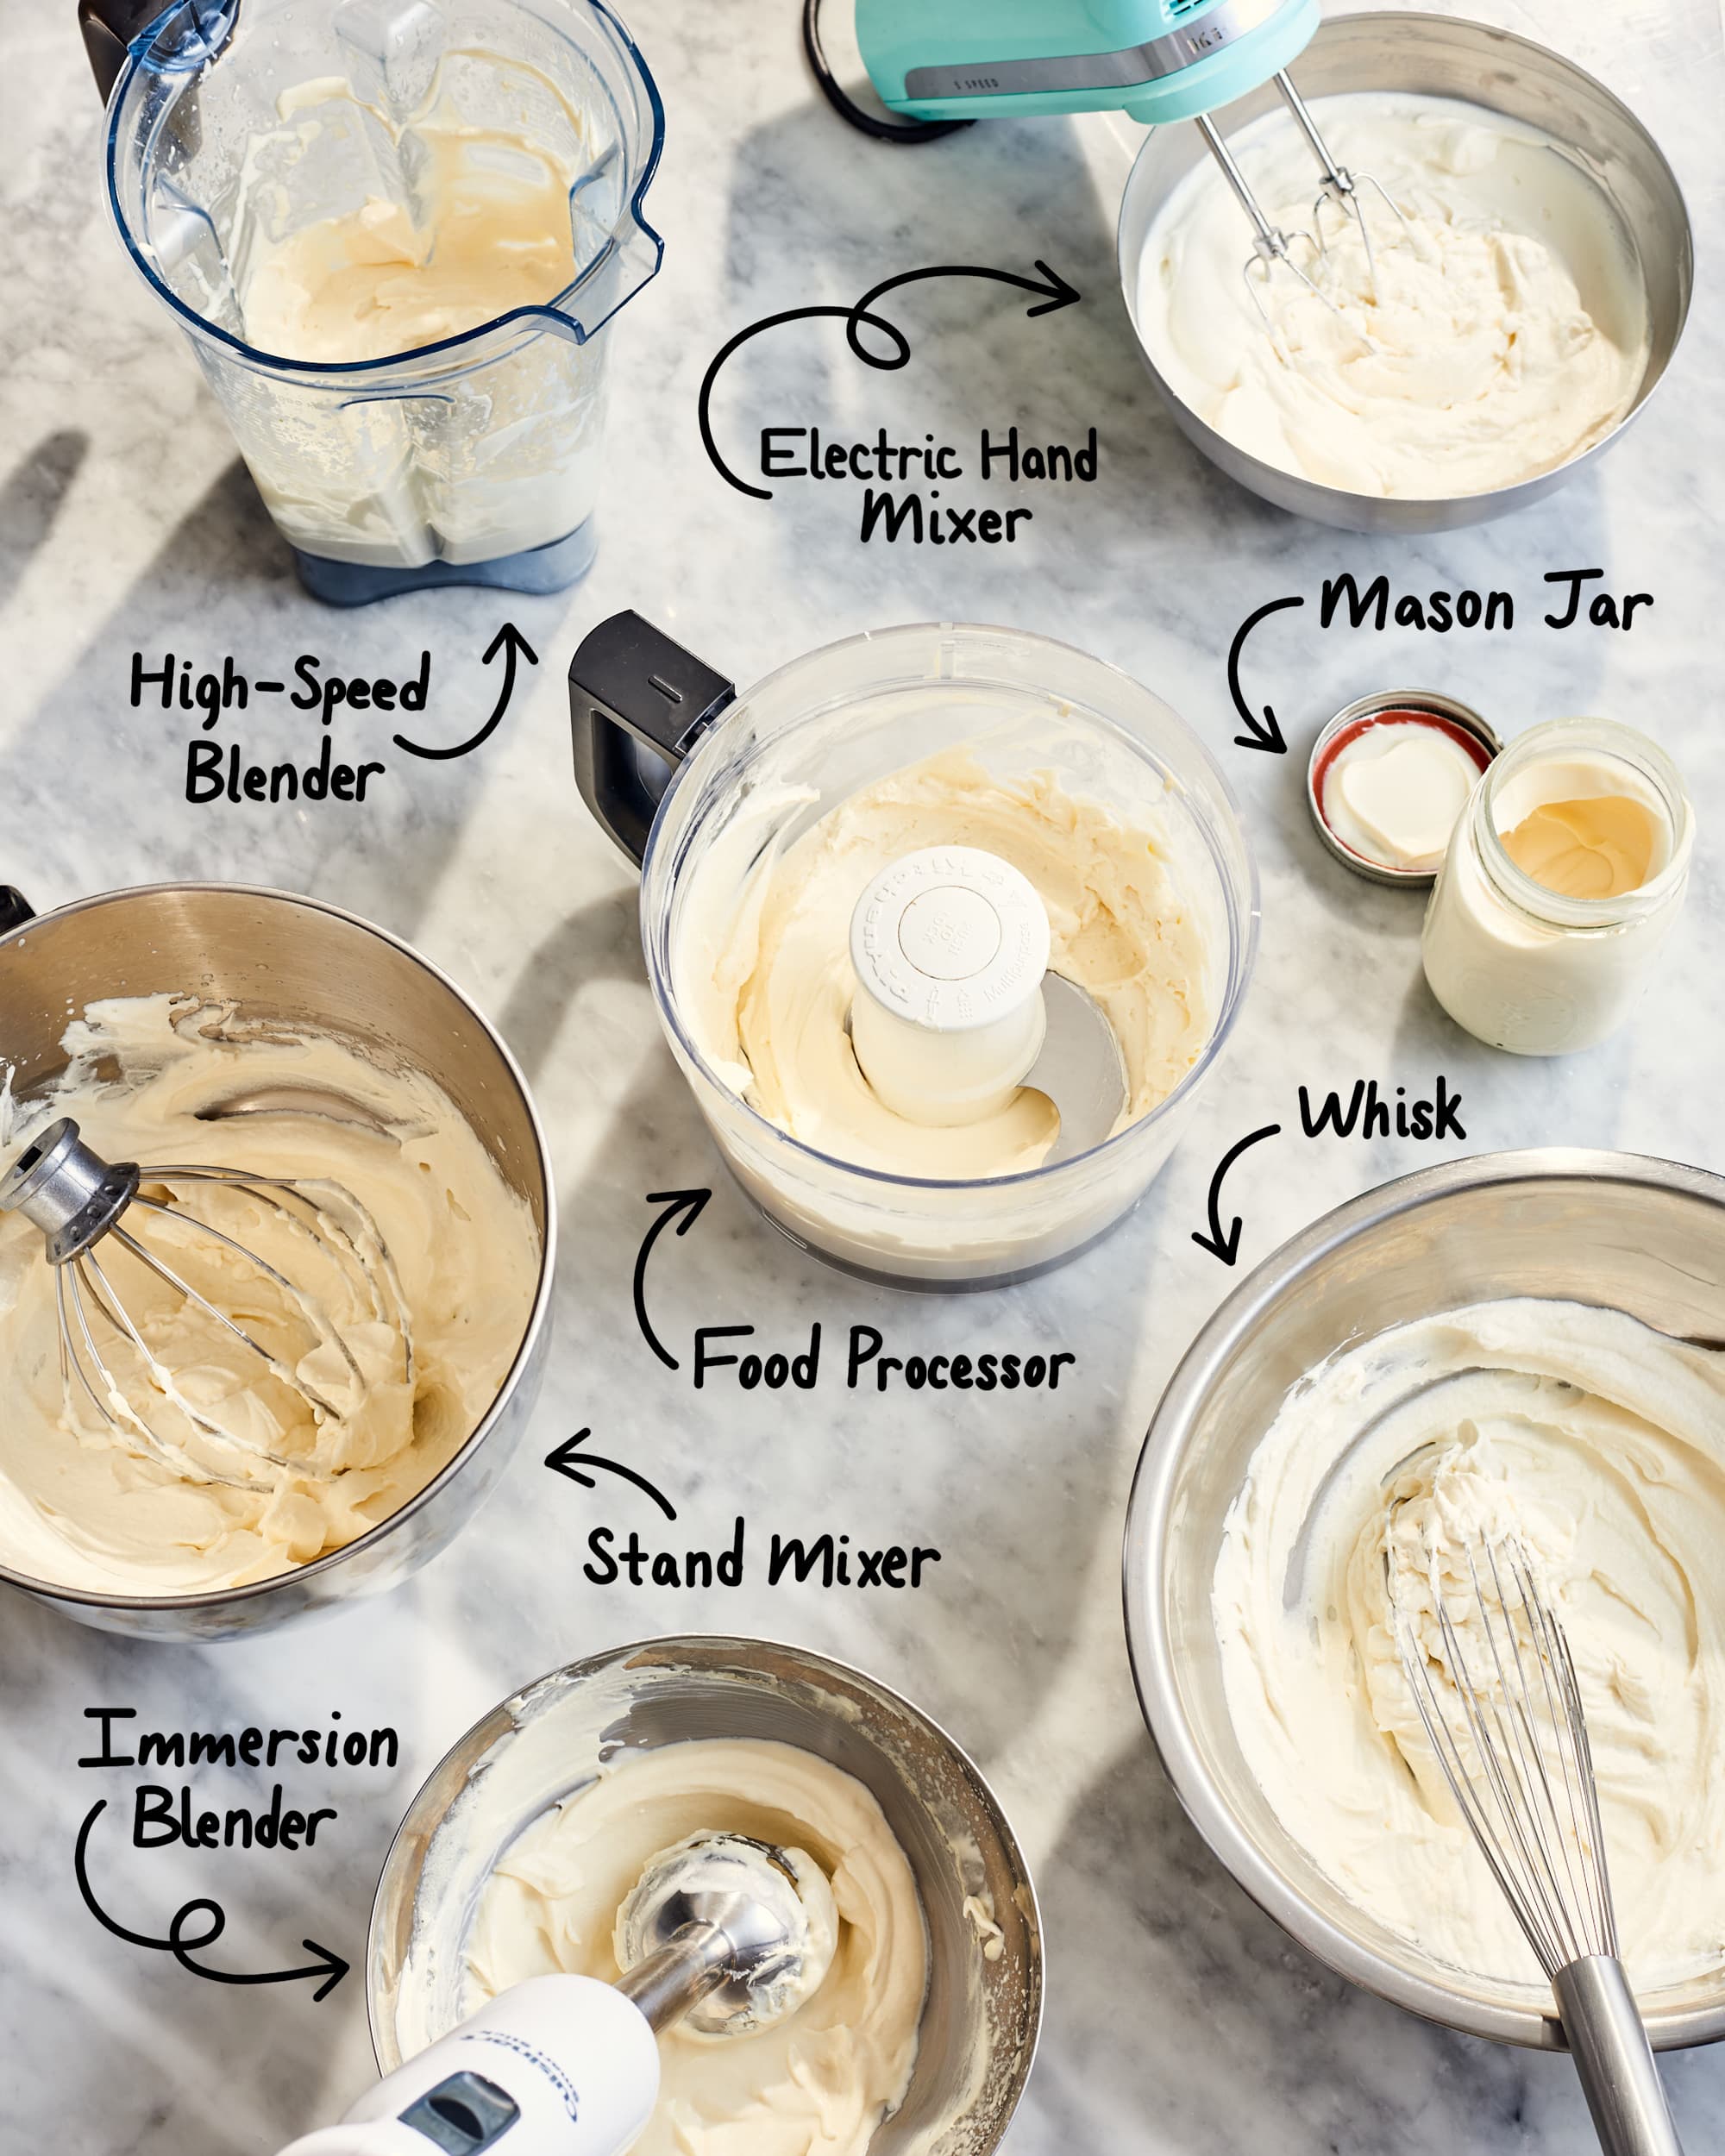 7 Best Hand Mixers For Whipping Cream Review - The Jerusalem Post